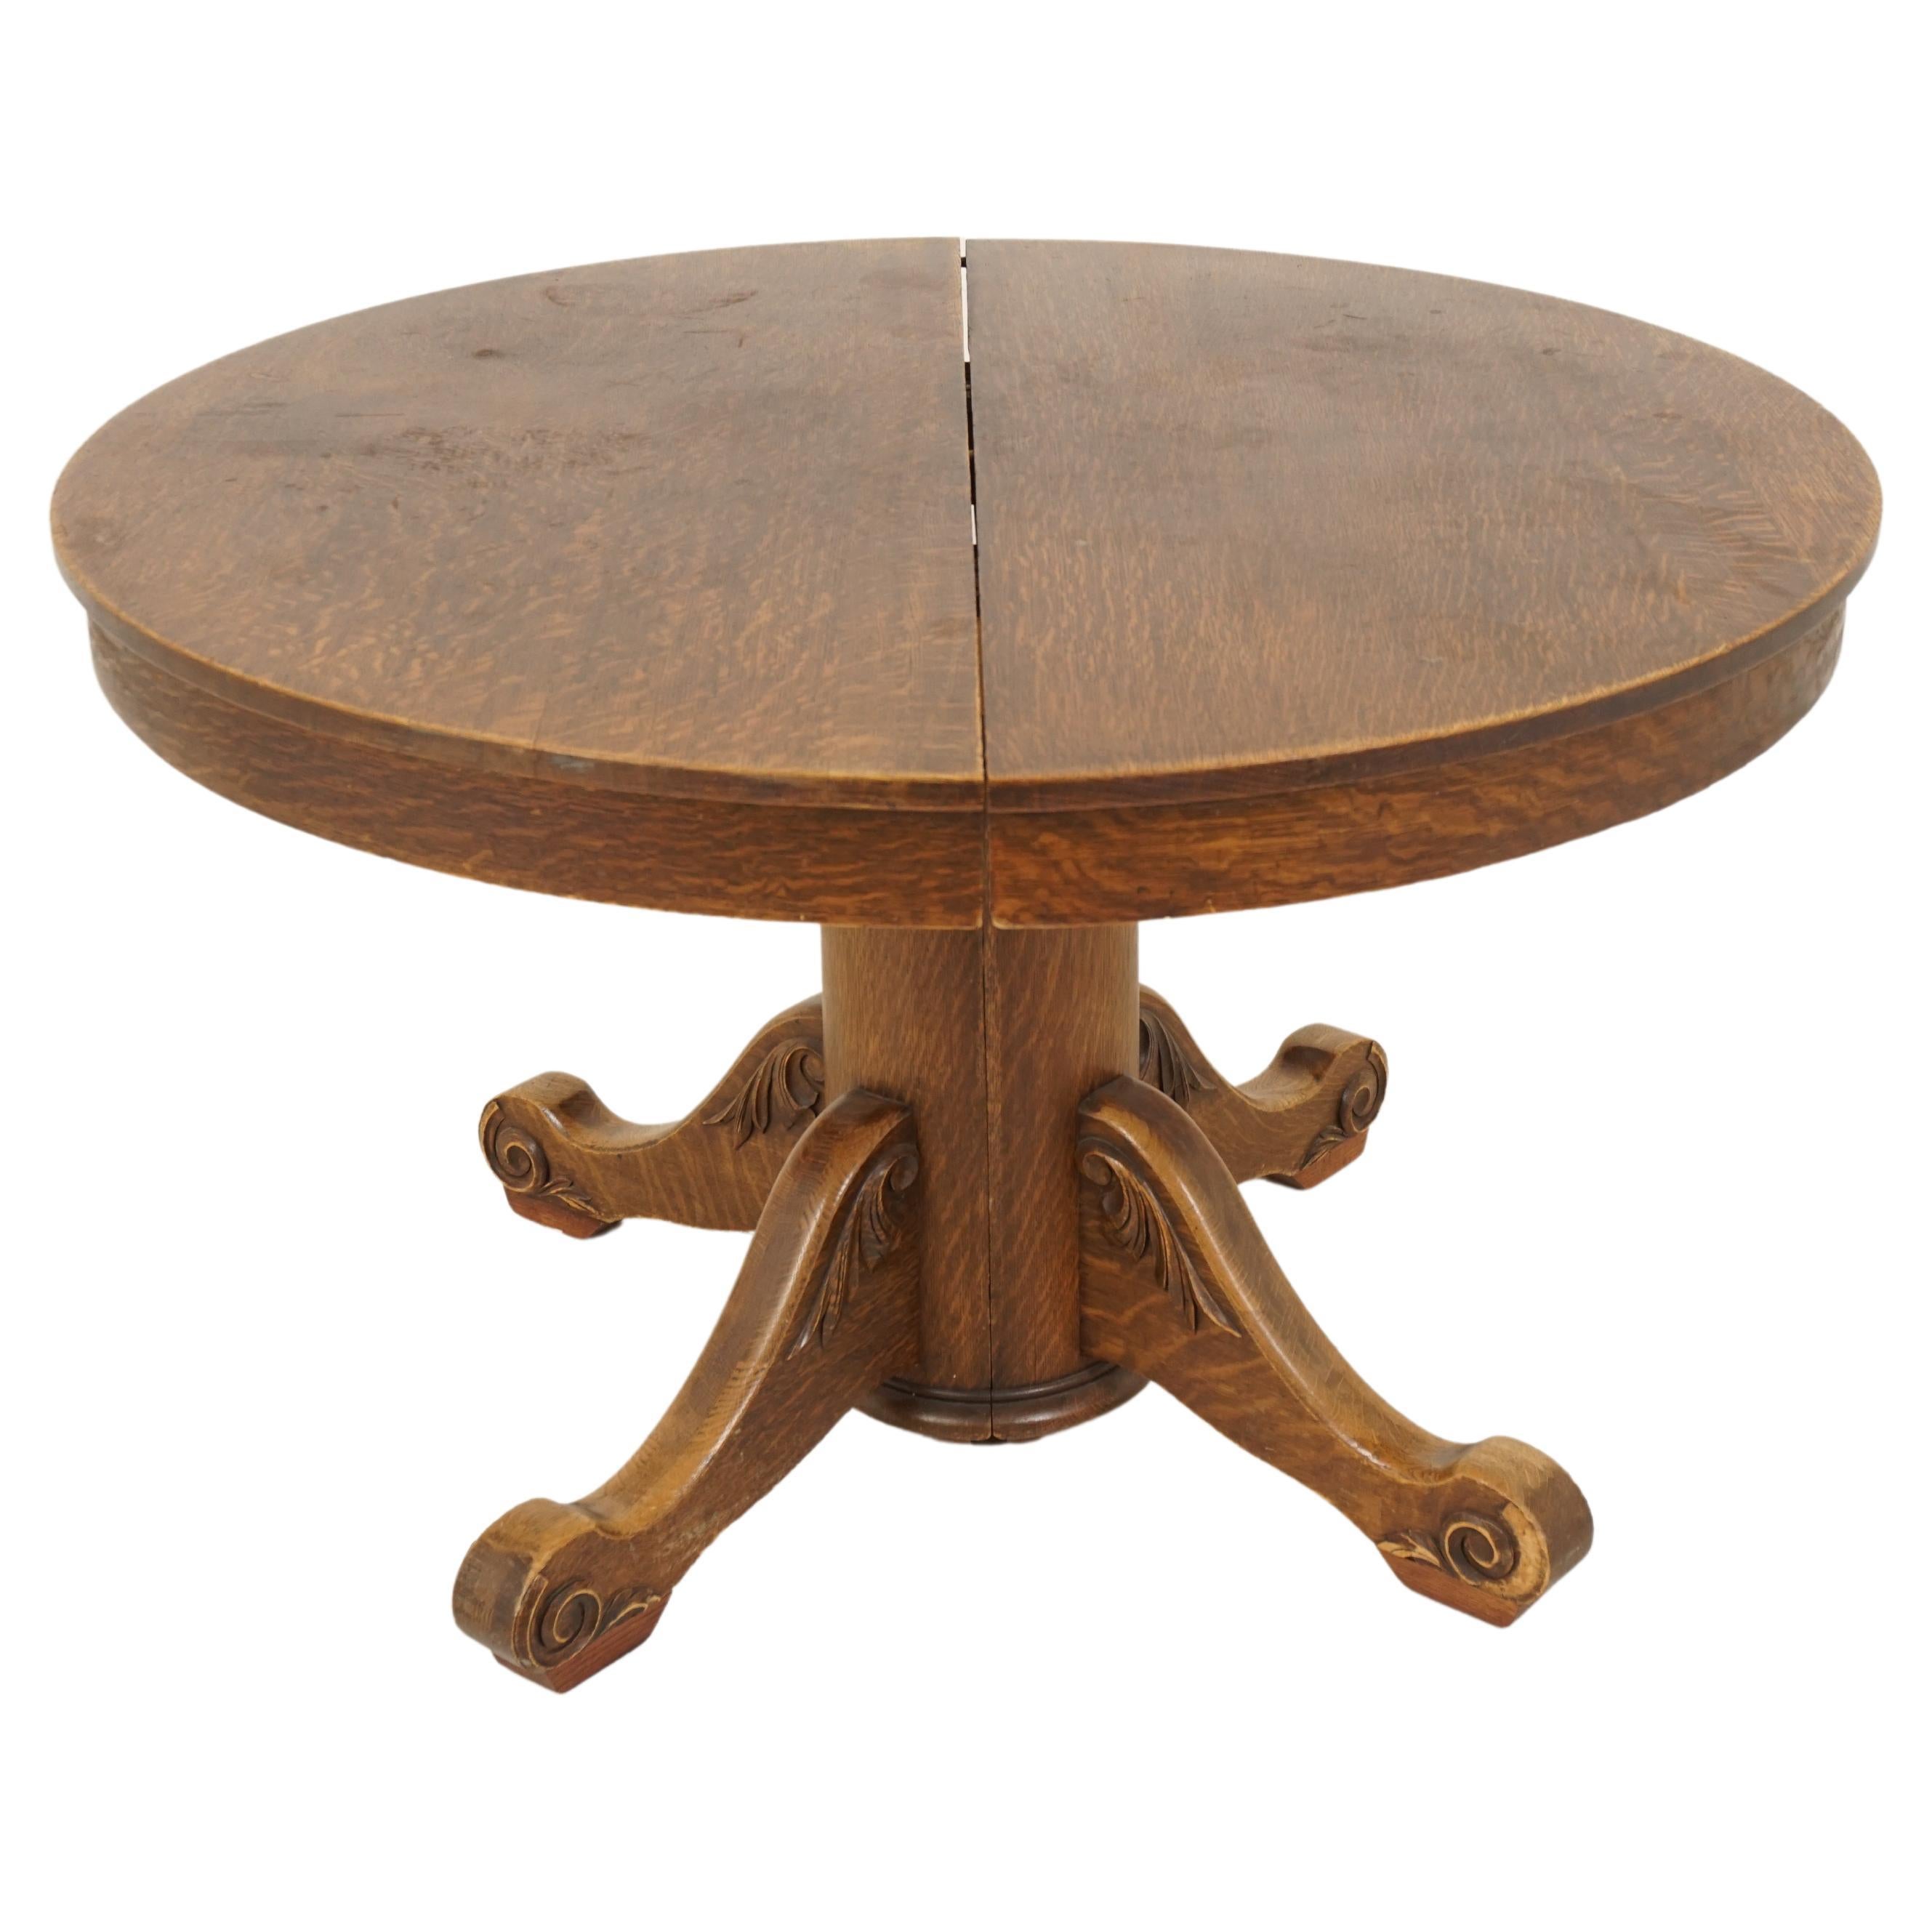 Antique Round Dining Table, Early American, Oak Table with Leaves, 1910, B2857